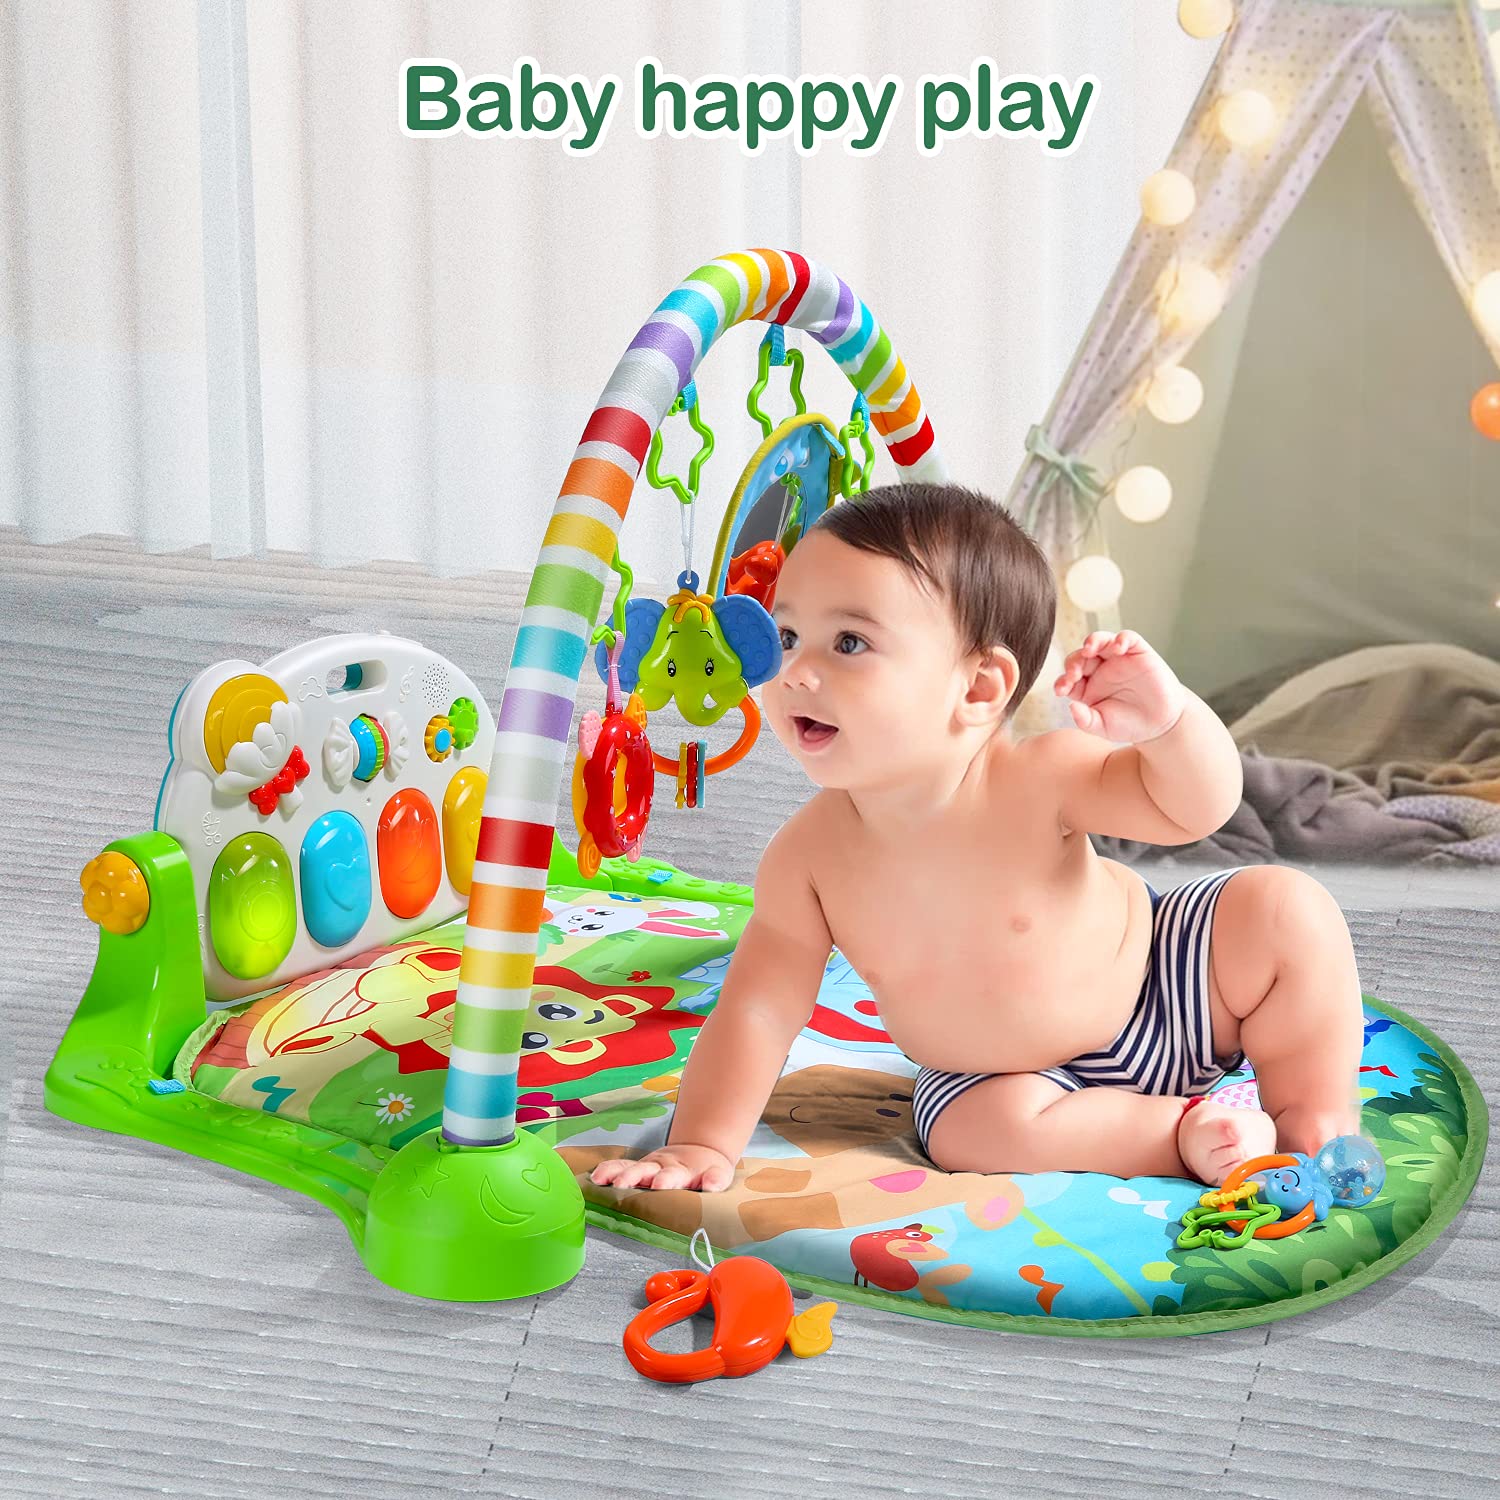 CUTE STONE Baby Gym Play Mat, Play Piano Gym with Tummy Time Activity Mat, Musical Activity Center for Infants Toddlers